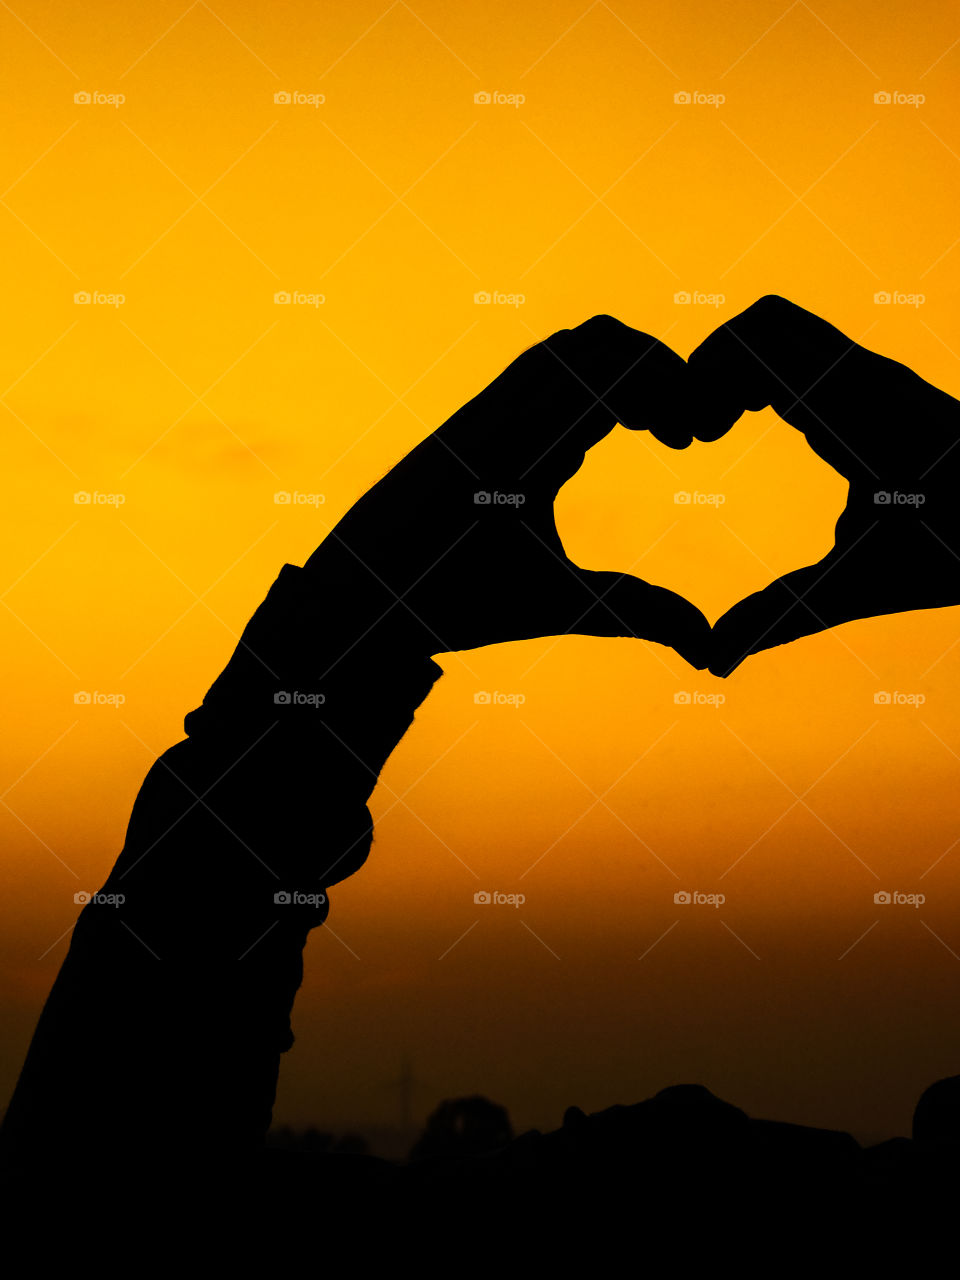 Love wallpaper or heart shaped hand posture with beautiful background .